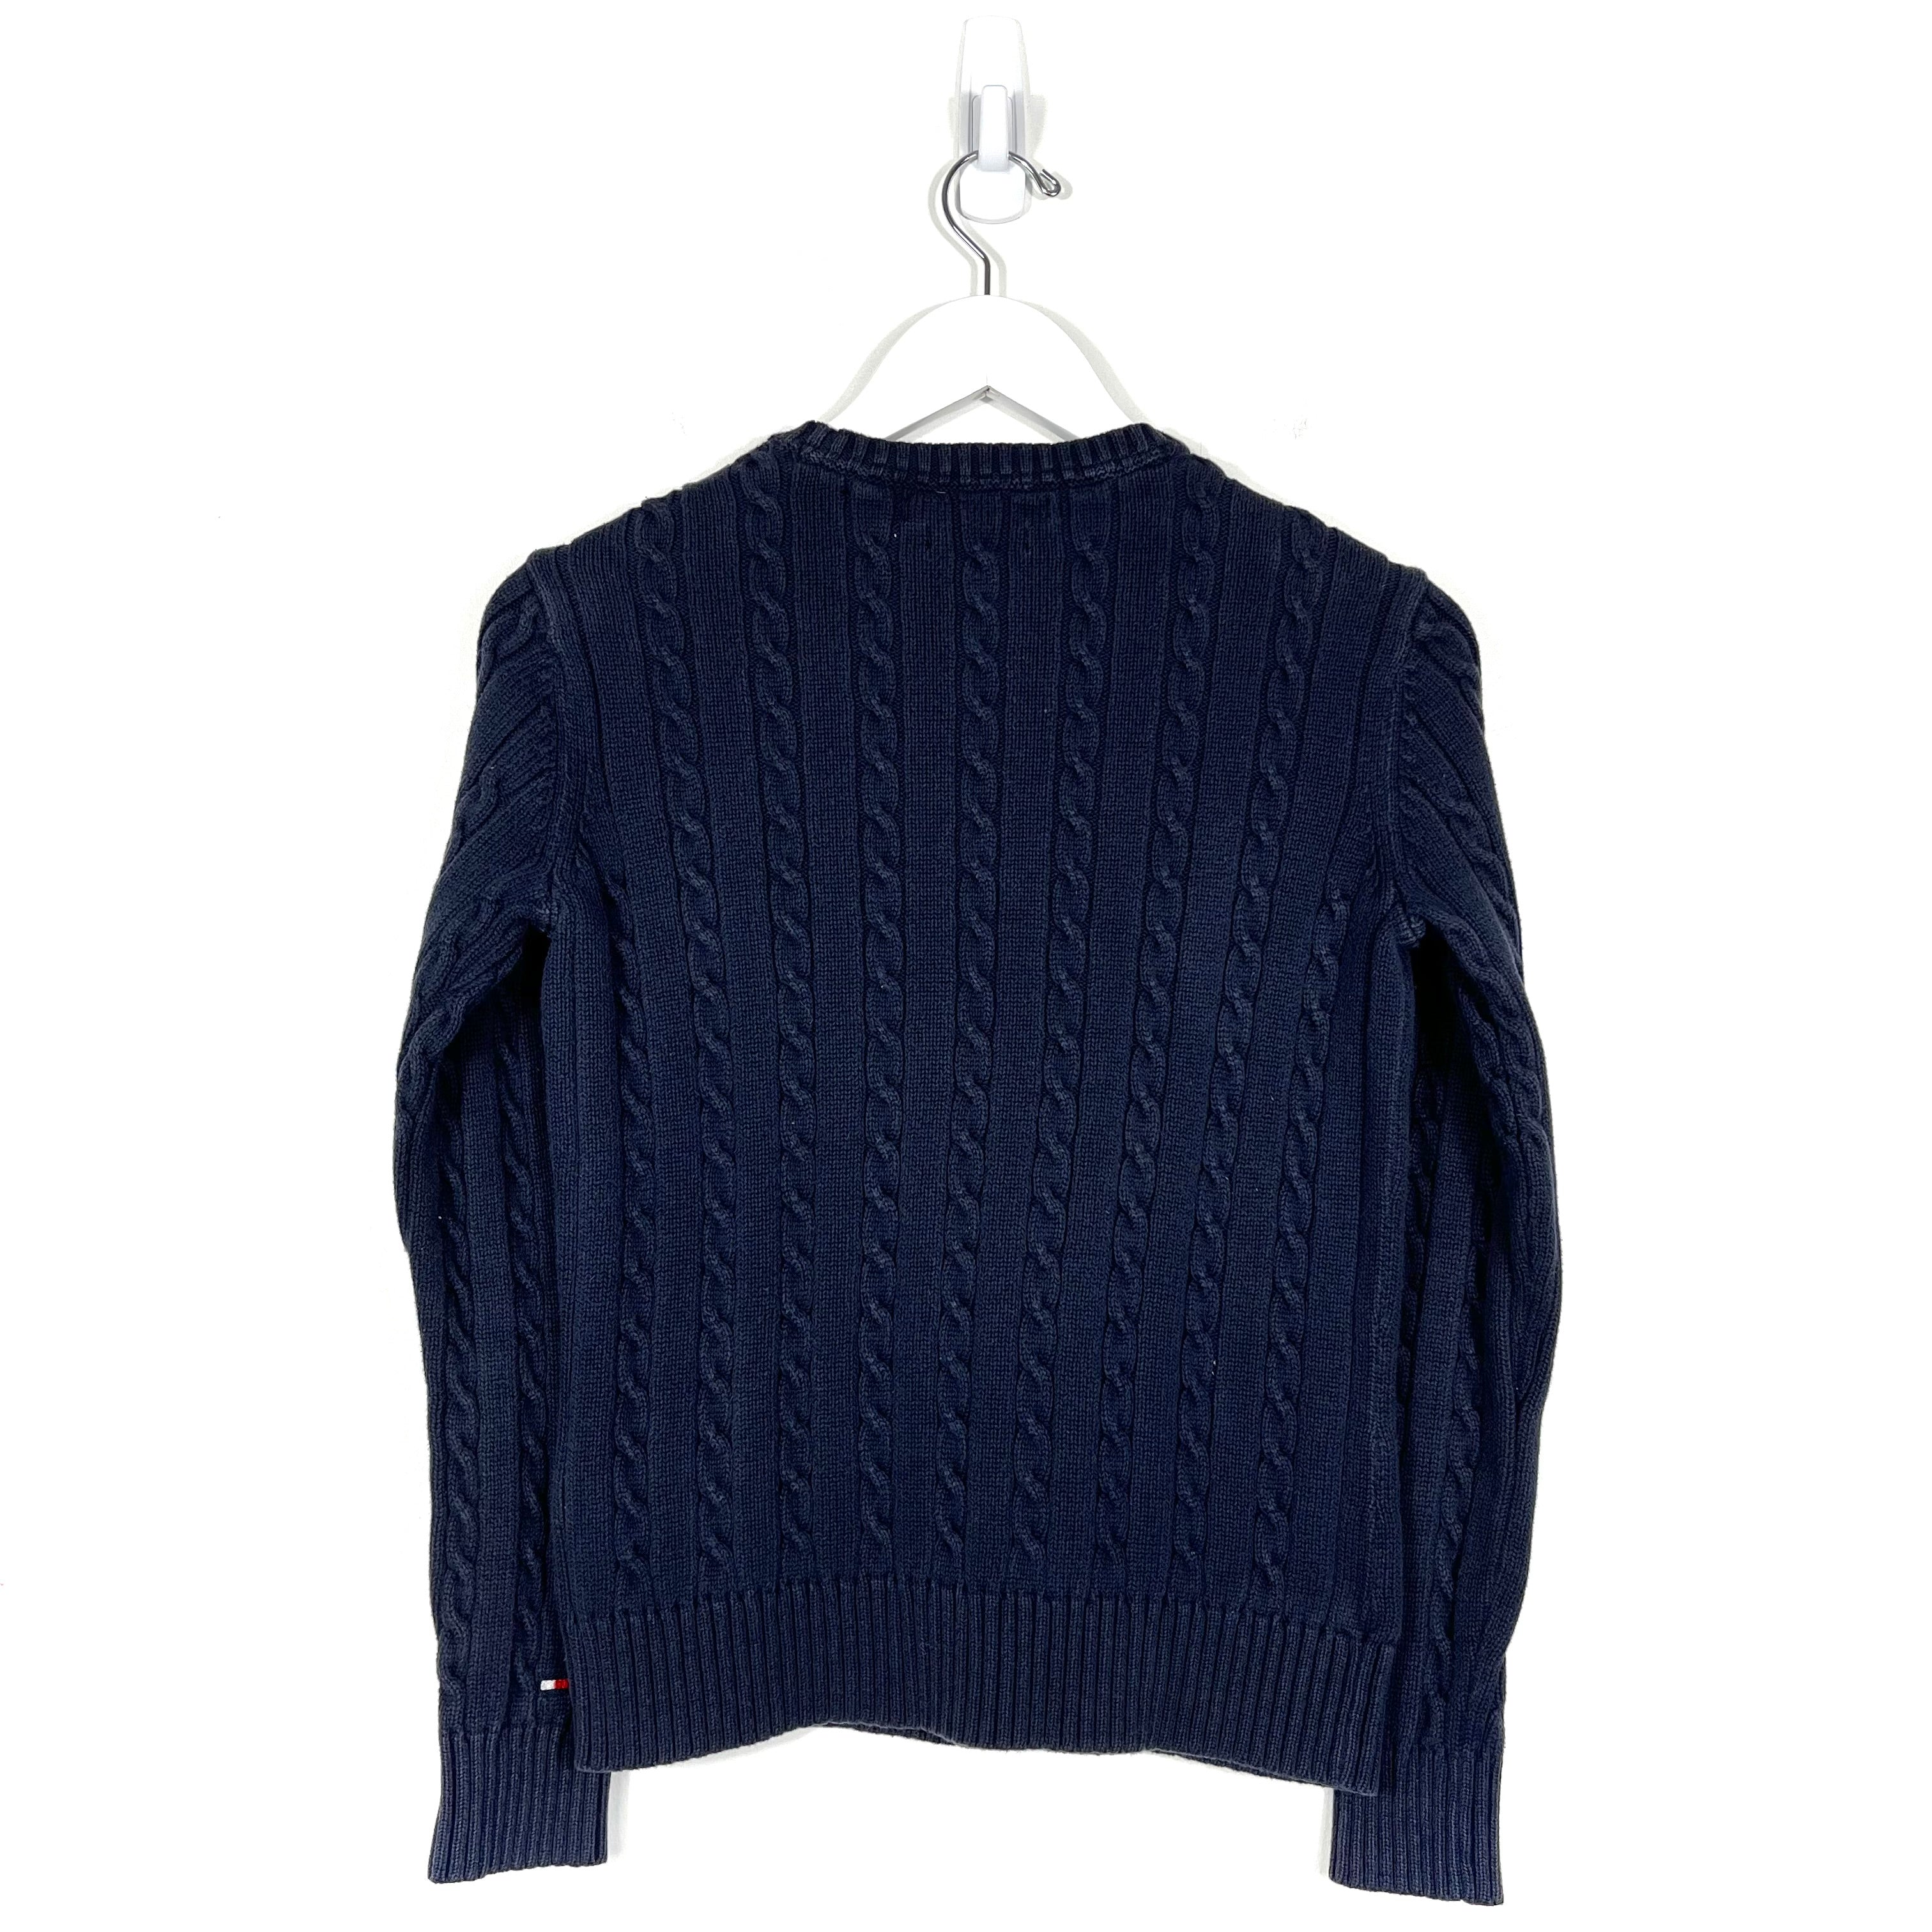 Tommy Hilfiger Sweater - Women's Small